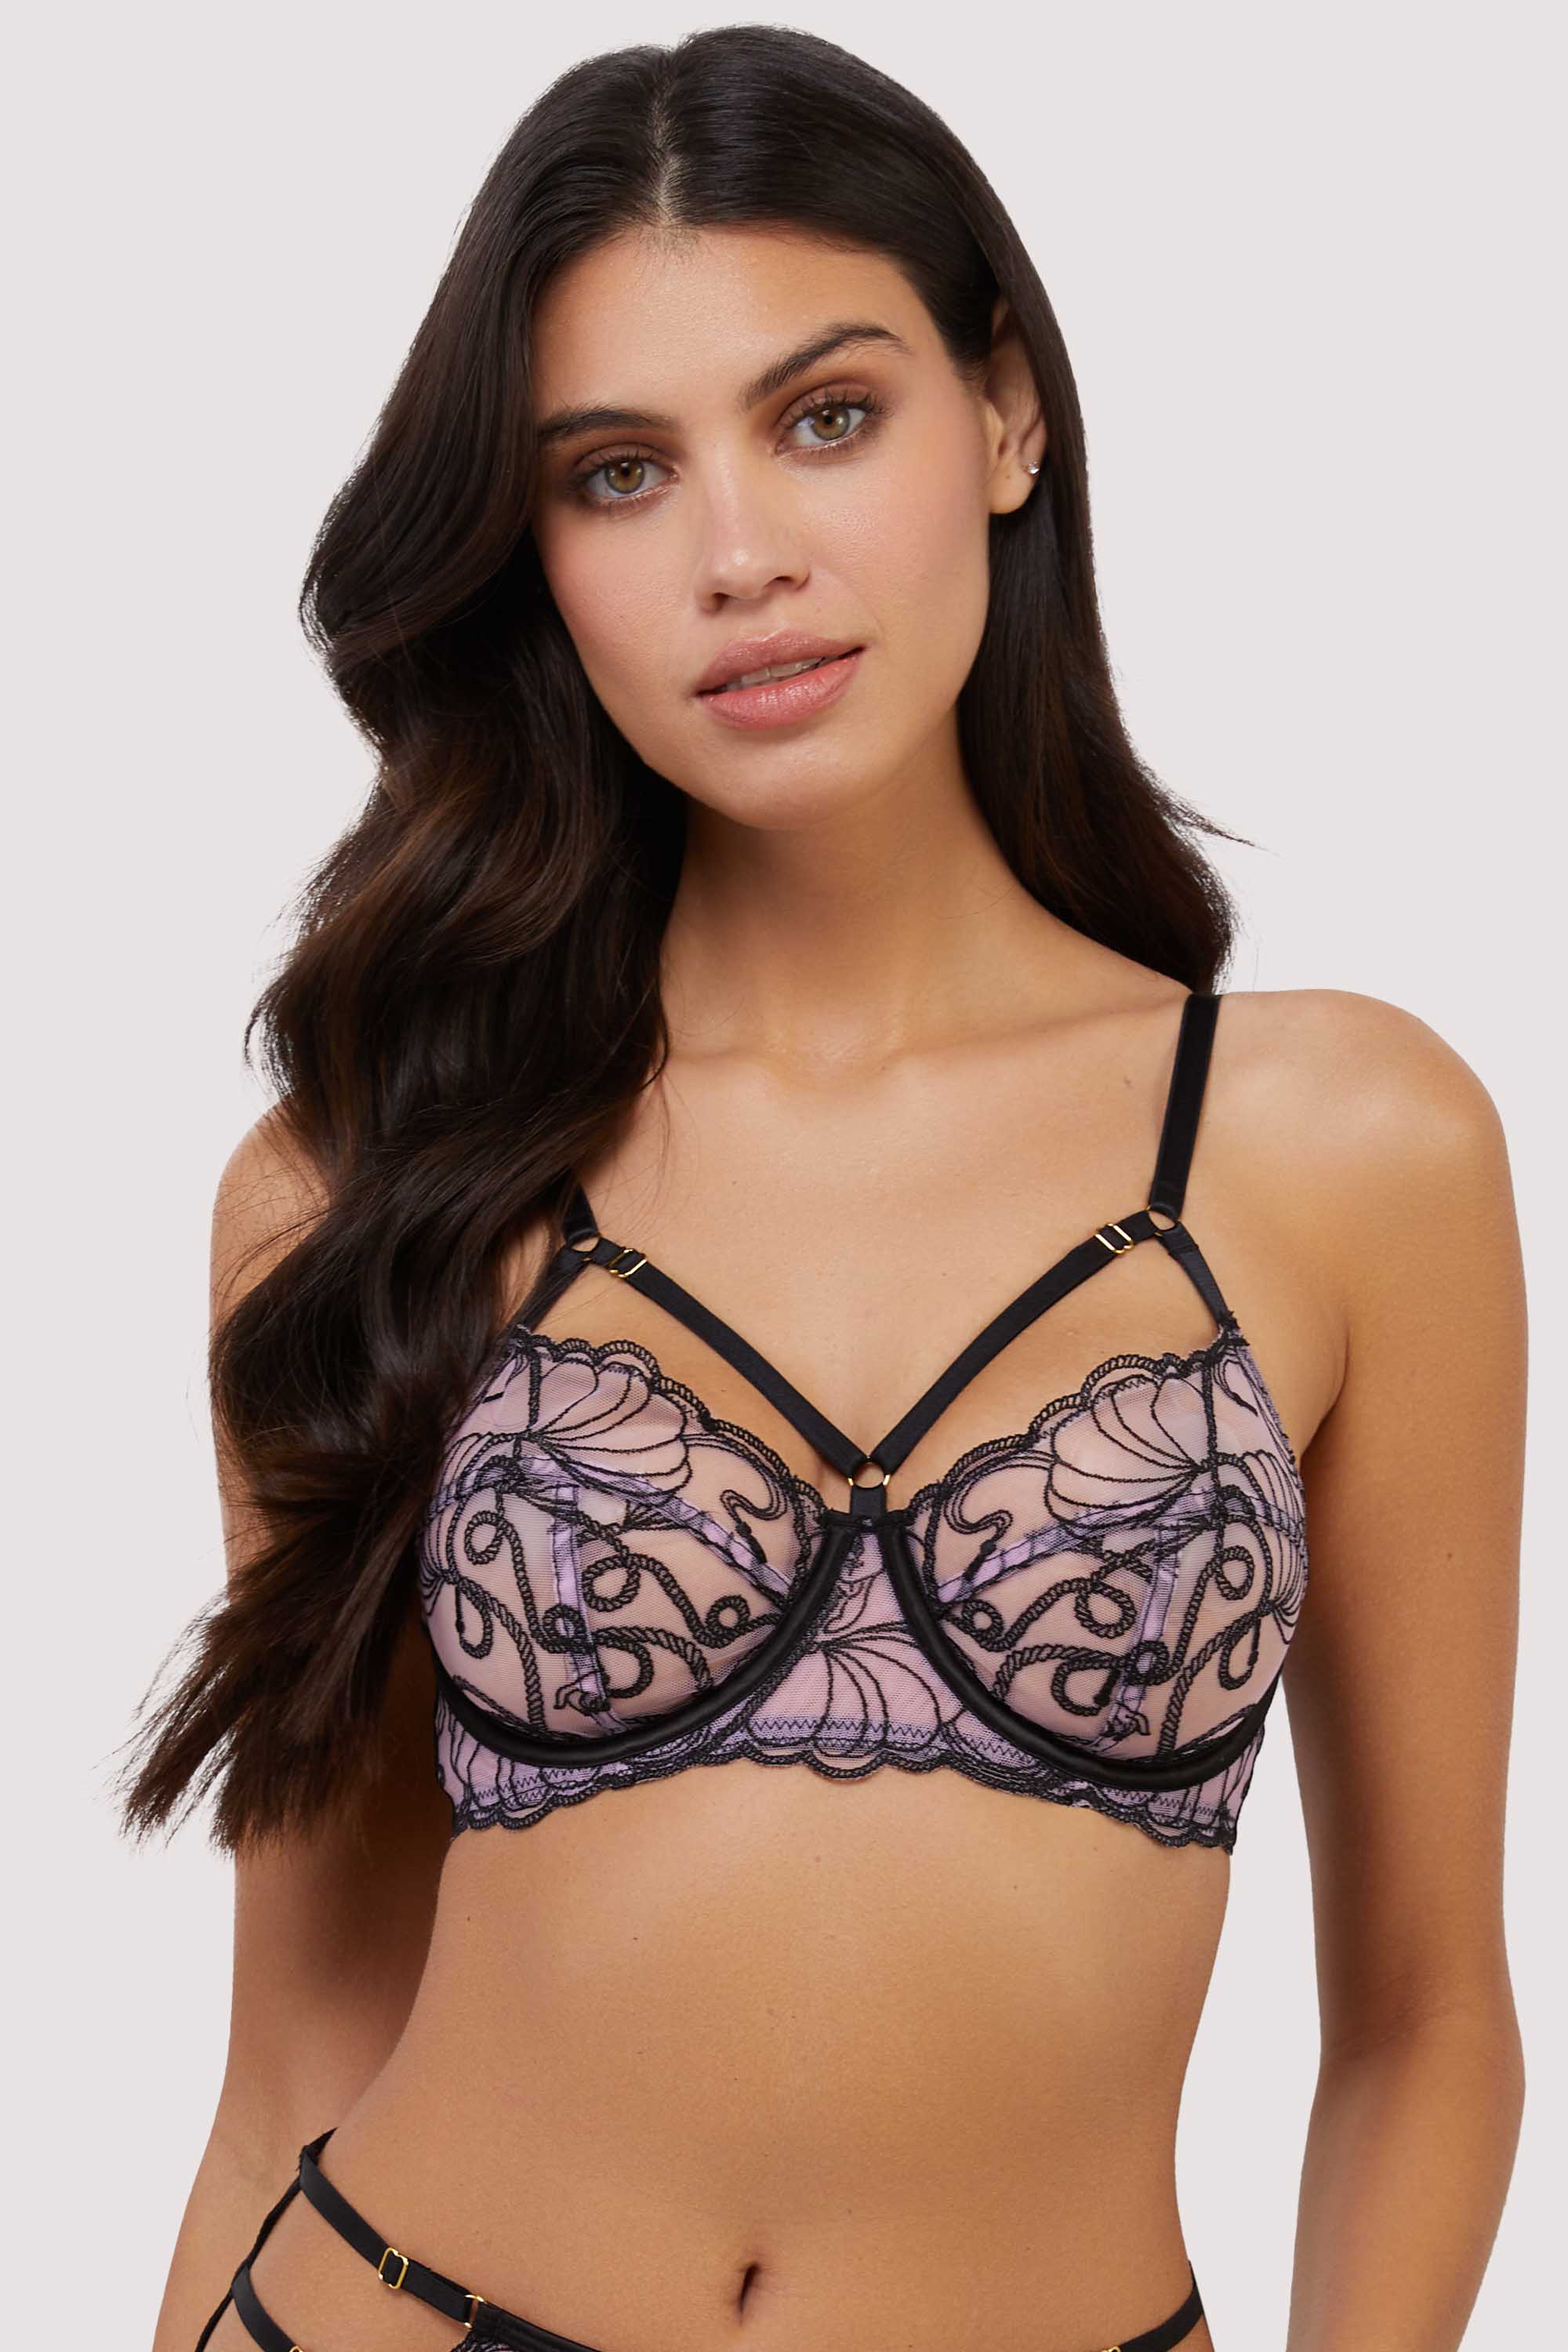 model wears pink and black embroidered bra with straps